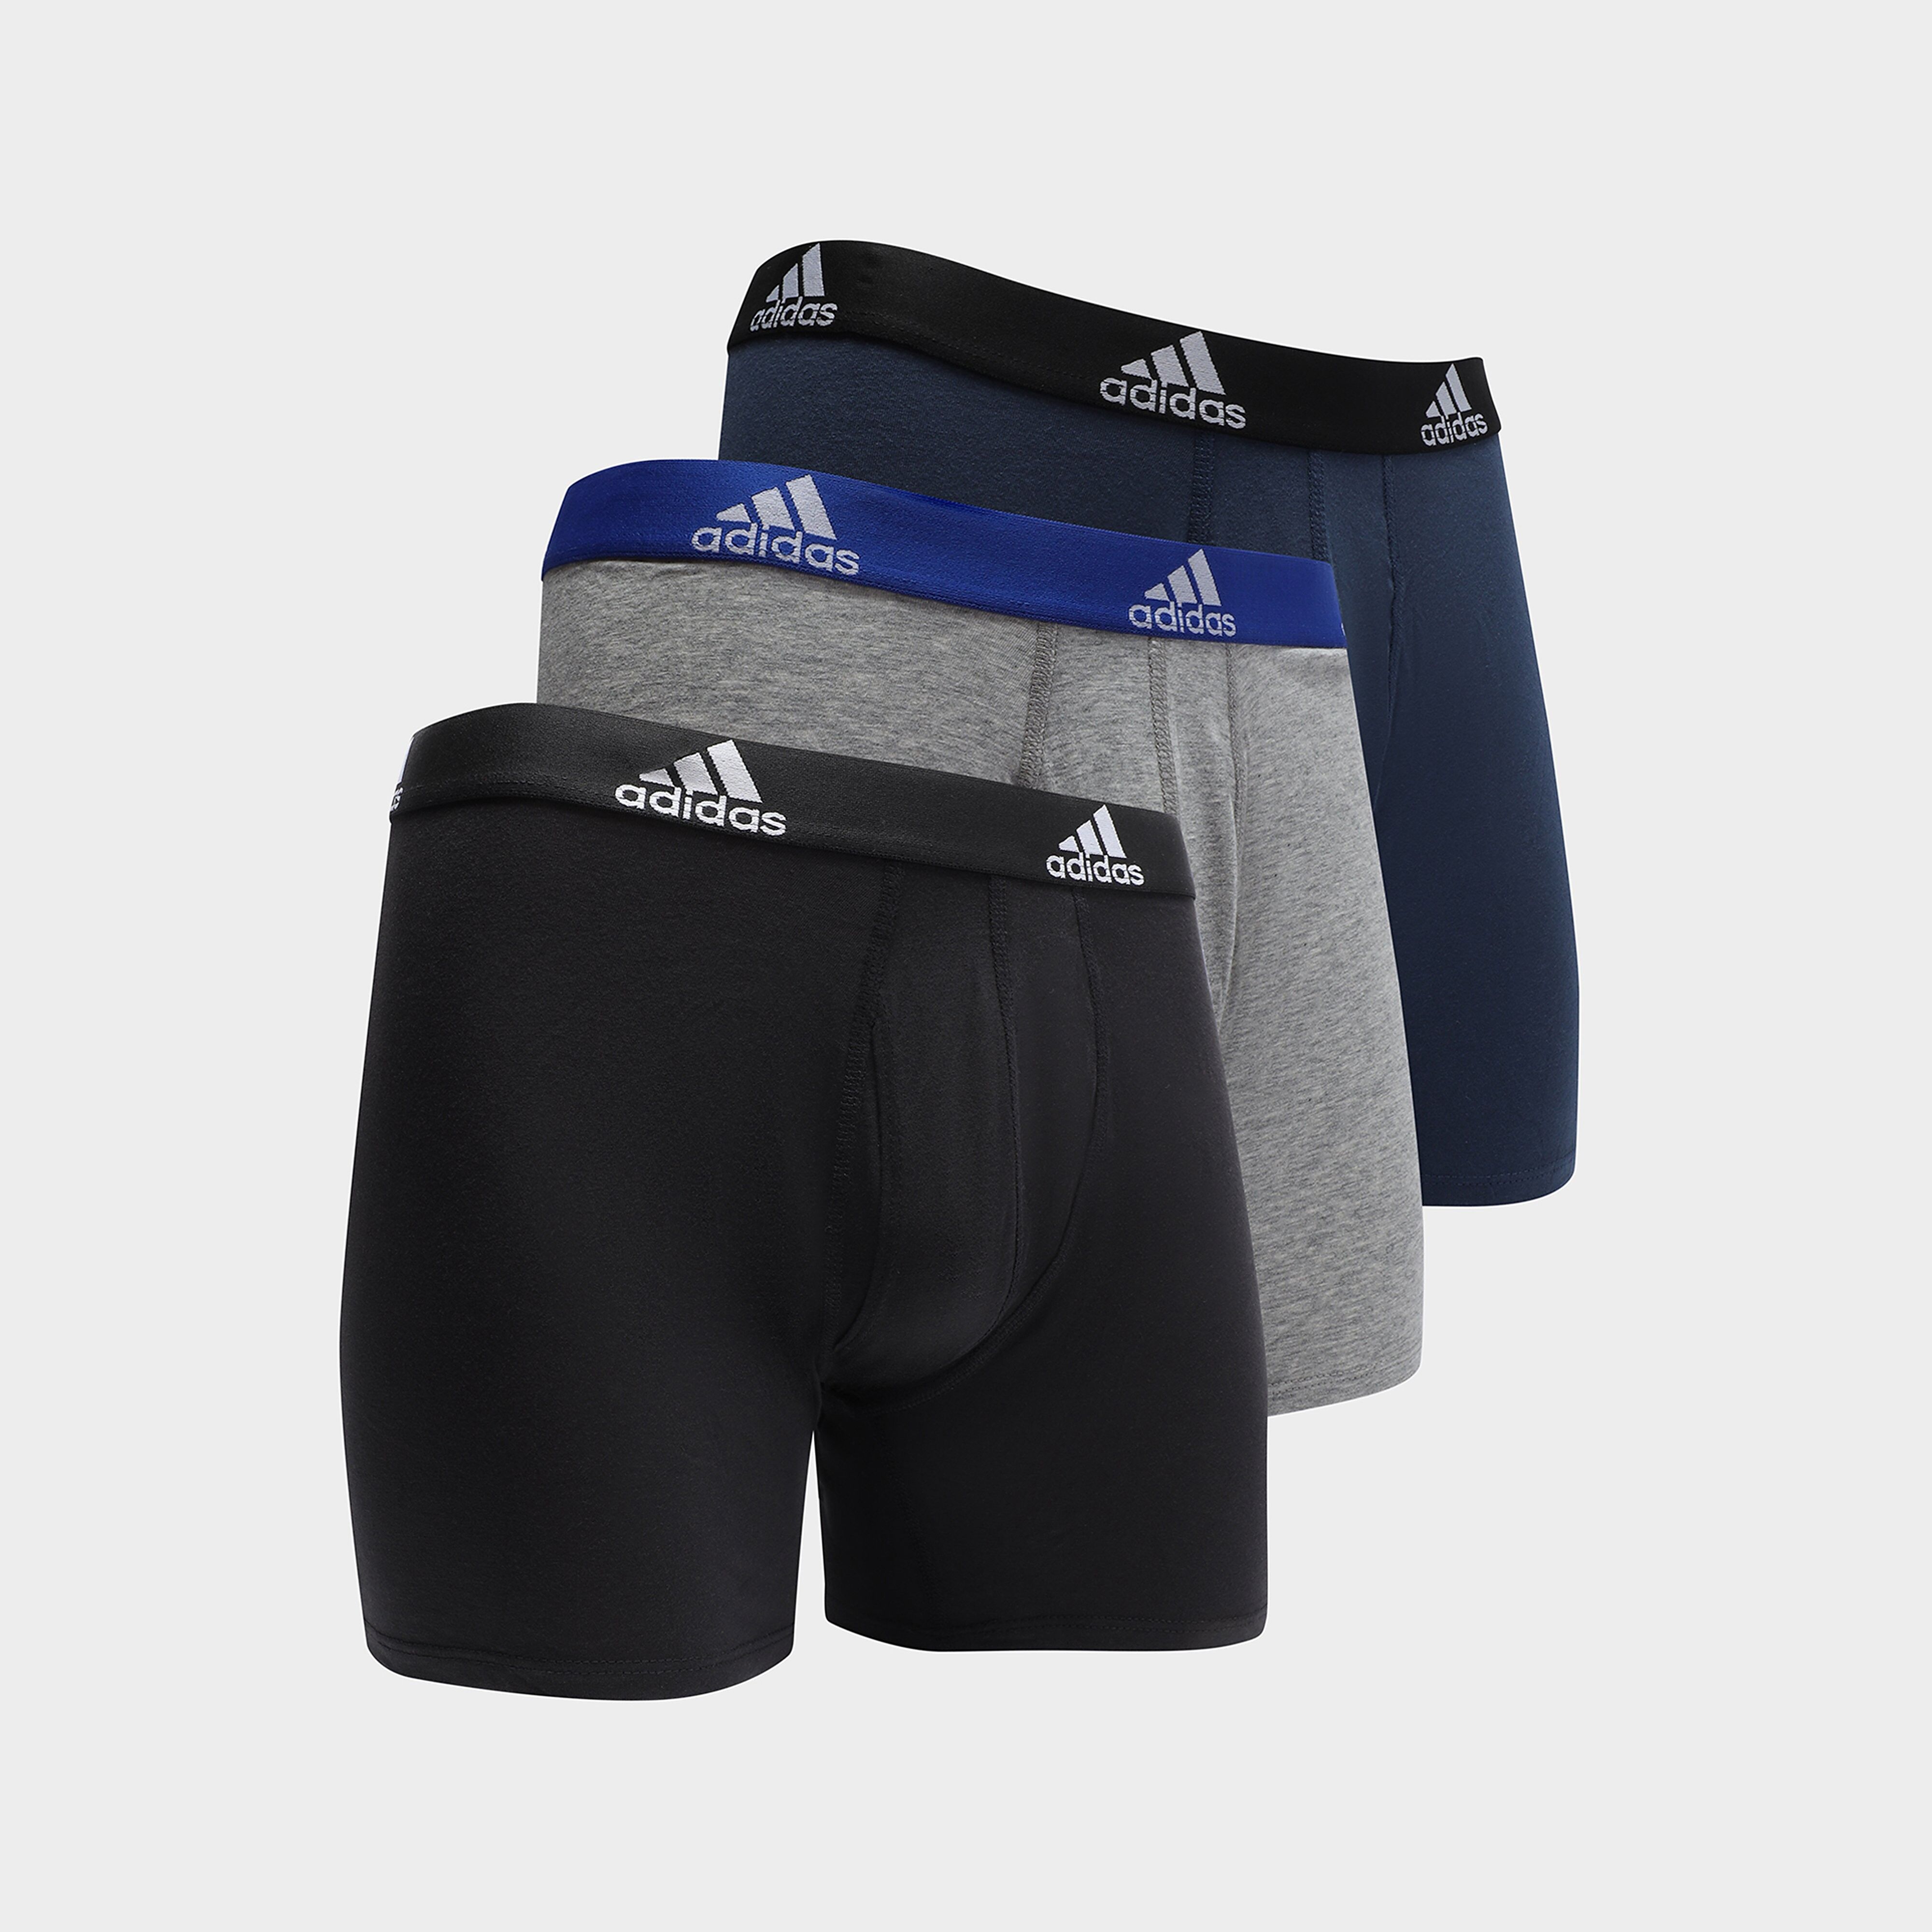 adidas Badge of Sport 3 Pack Trunks - Multi - Mens  size: L